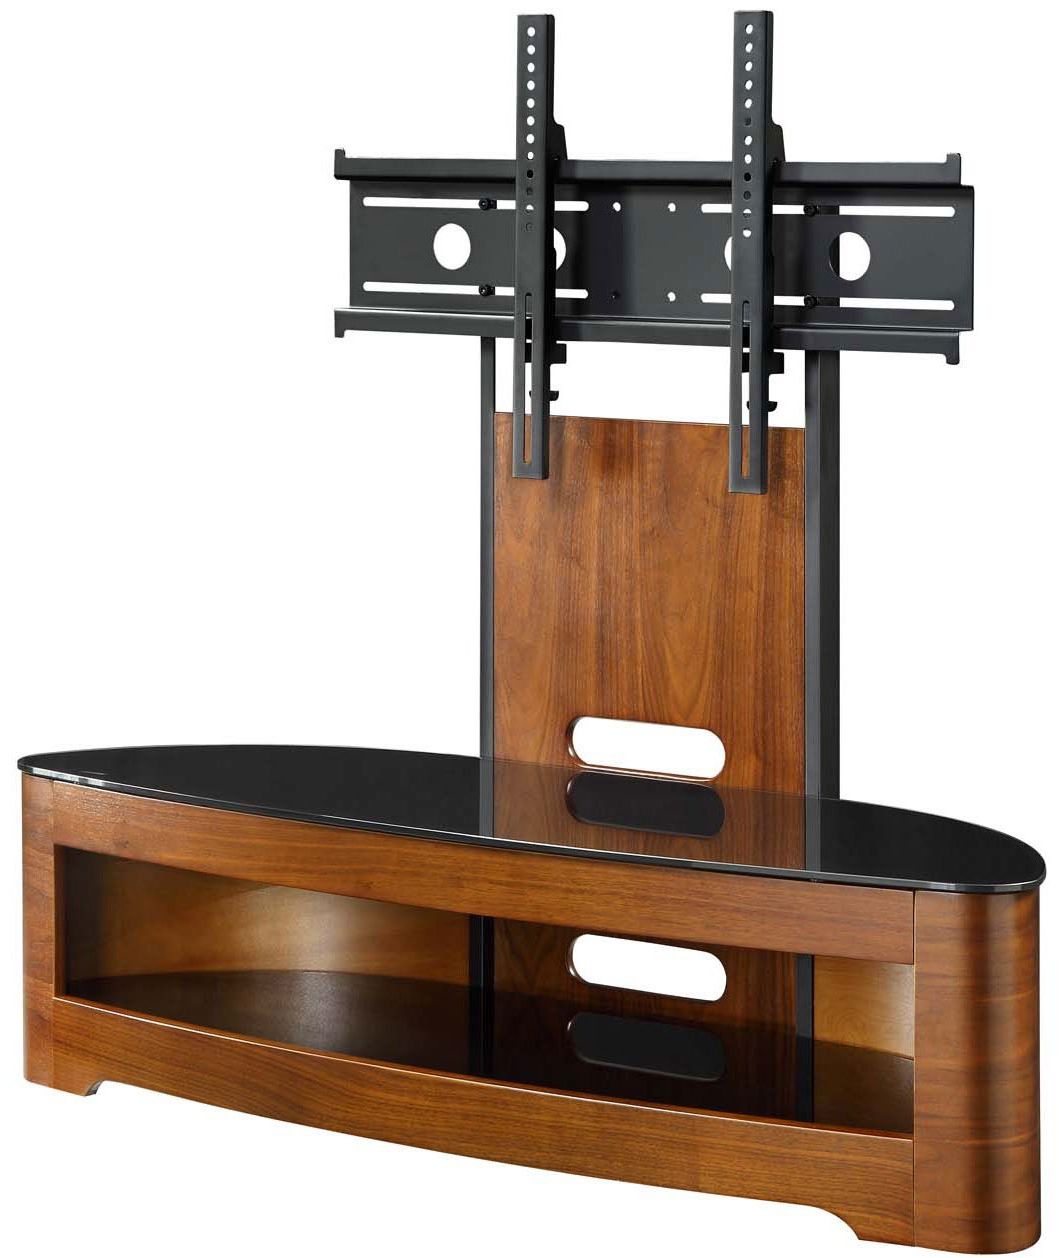 Tv Stand Walmart 3 Shelf Glass Led Tier Wood And Wall Mounted Ikea Throughout Well Known Cantilever Glass Tv Stands (View 16 of 20)